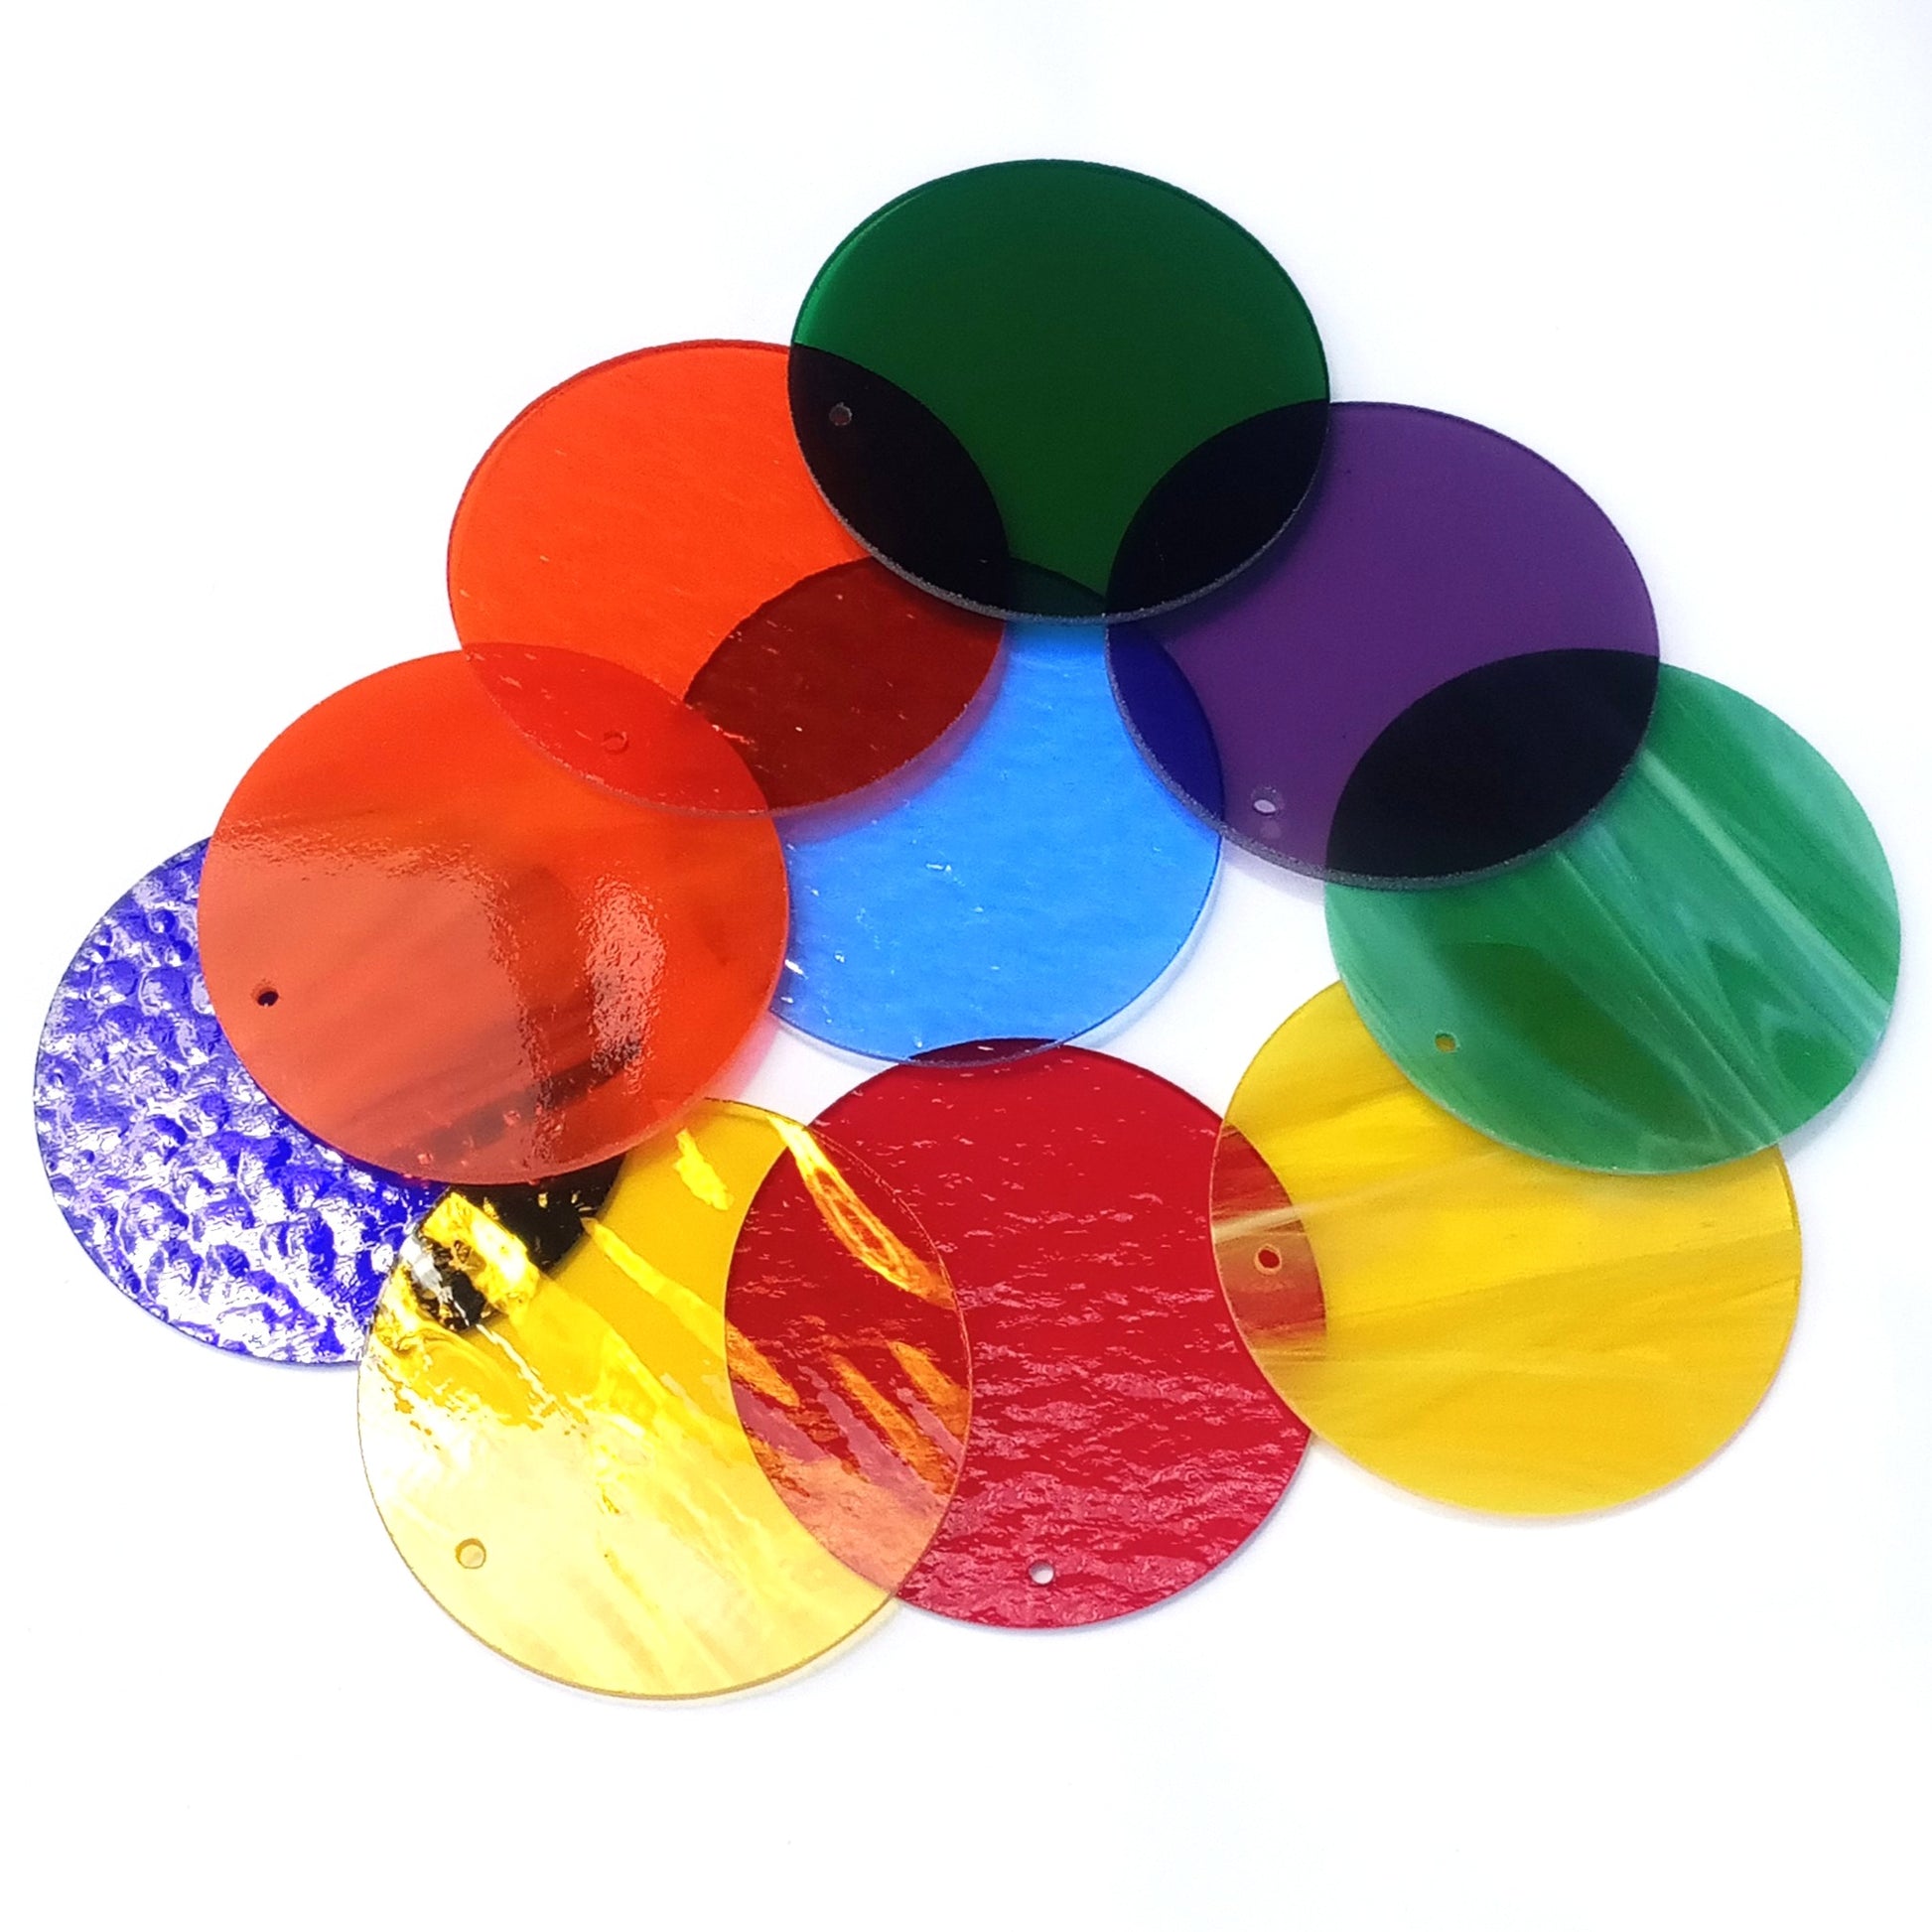 Precut Stained Glass Circles with Holes Drilled for Hanging, 3" Glass Circles for Ornaments, Windchimes, Glass Art, Suncatchers, Assorted Colors, All Translucent and Wispy Stained Glass